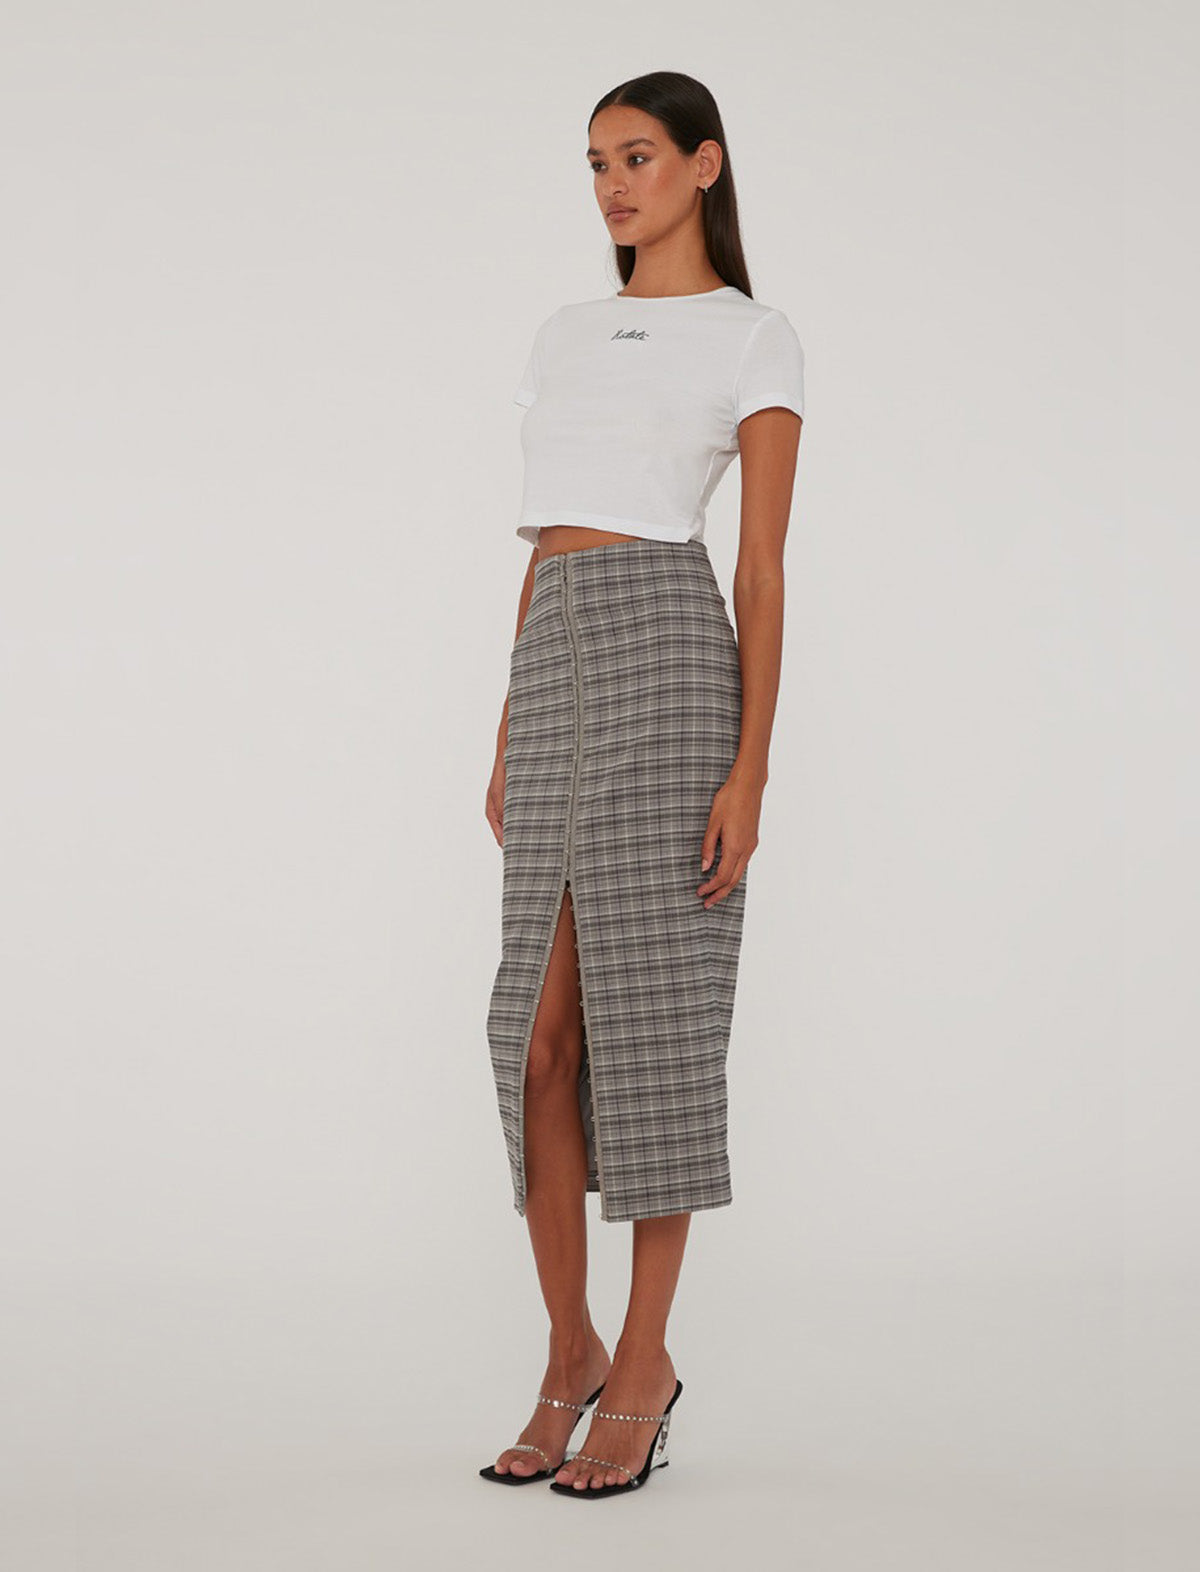 ROTATE Birger Christensen Stretchy Pencil Skirt In Gray Check+Frost Gray Comb